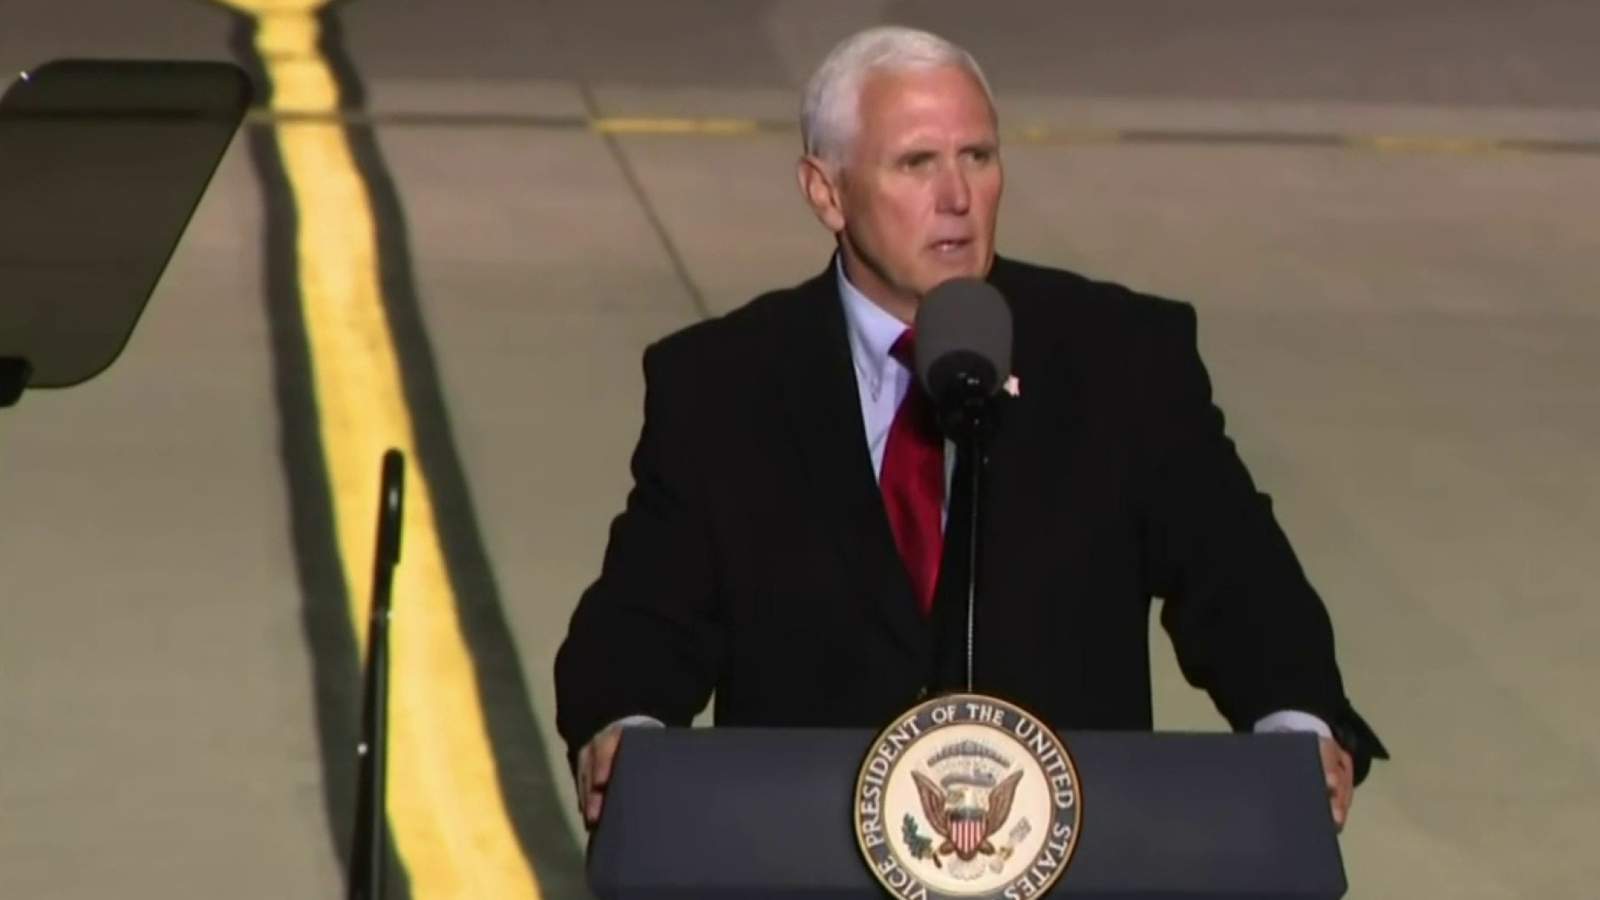 Vice President Pence campaigns in Flint on Wednesday